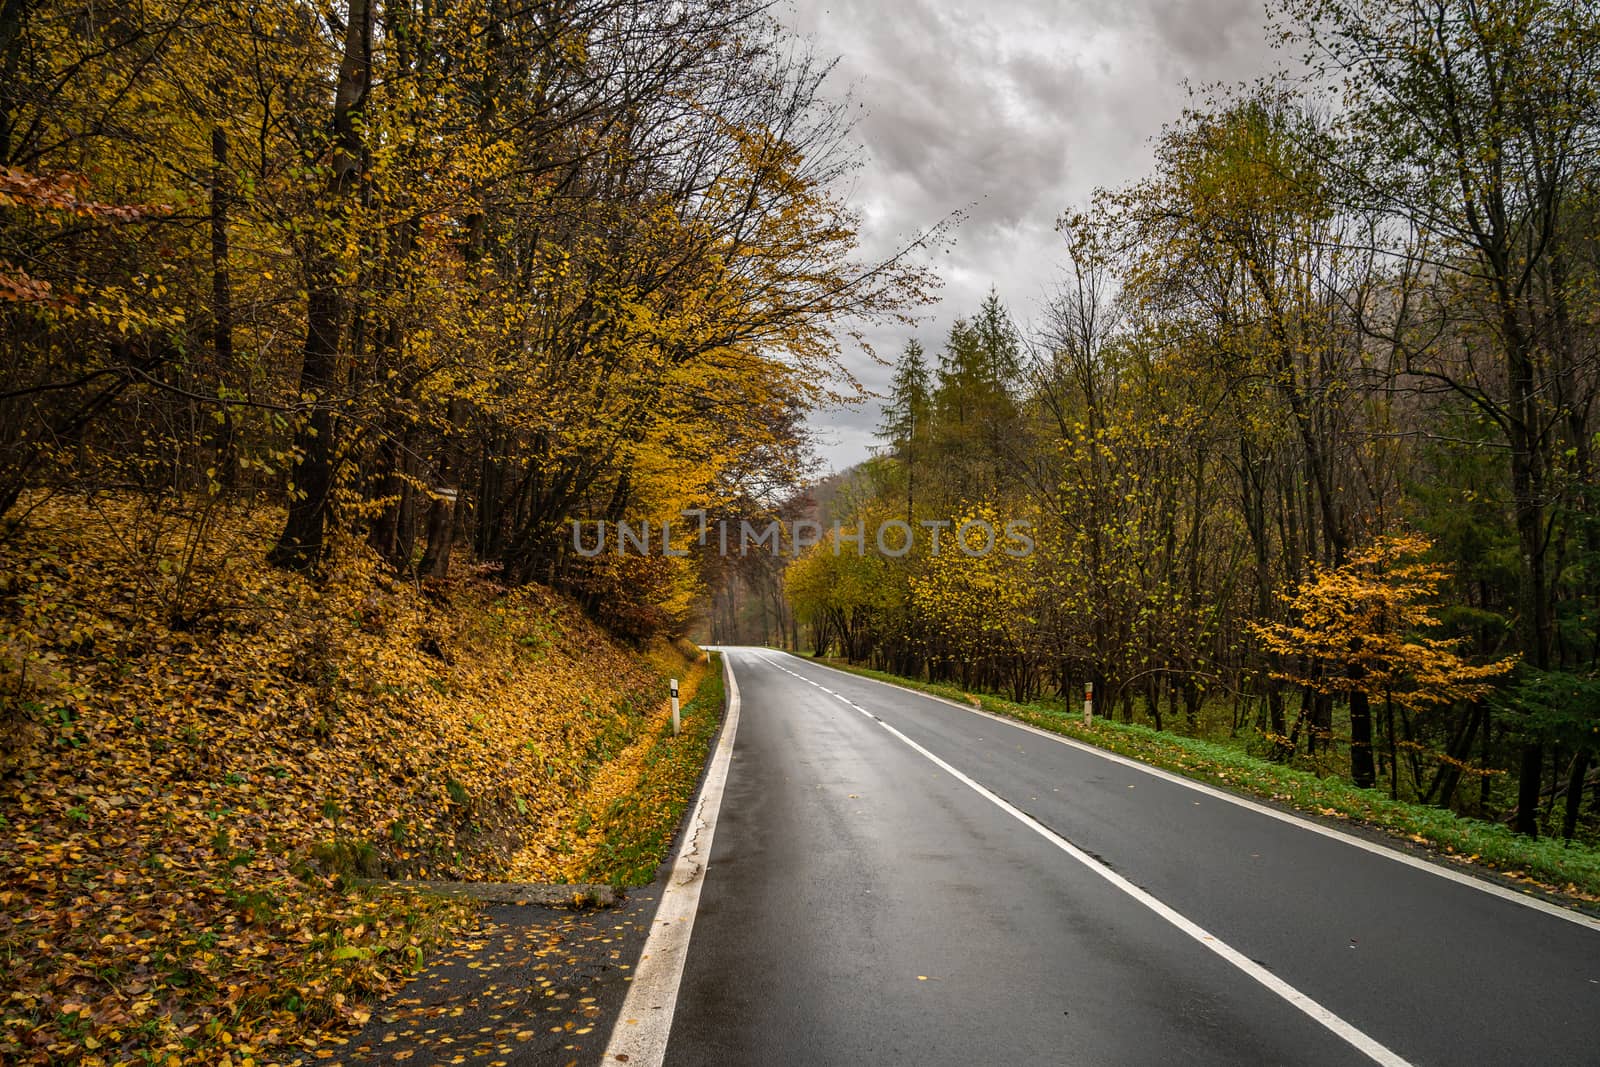 asphalt road in the autumn forest by Edophoto